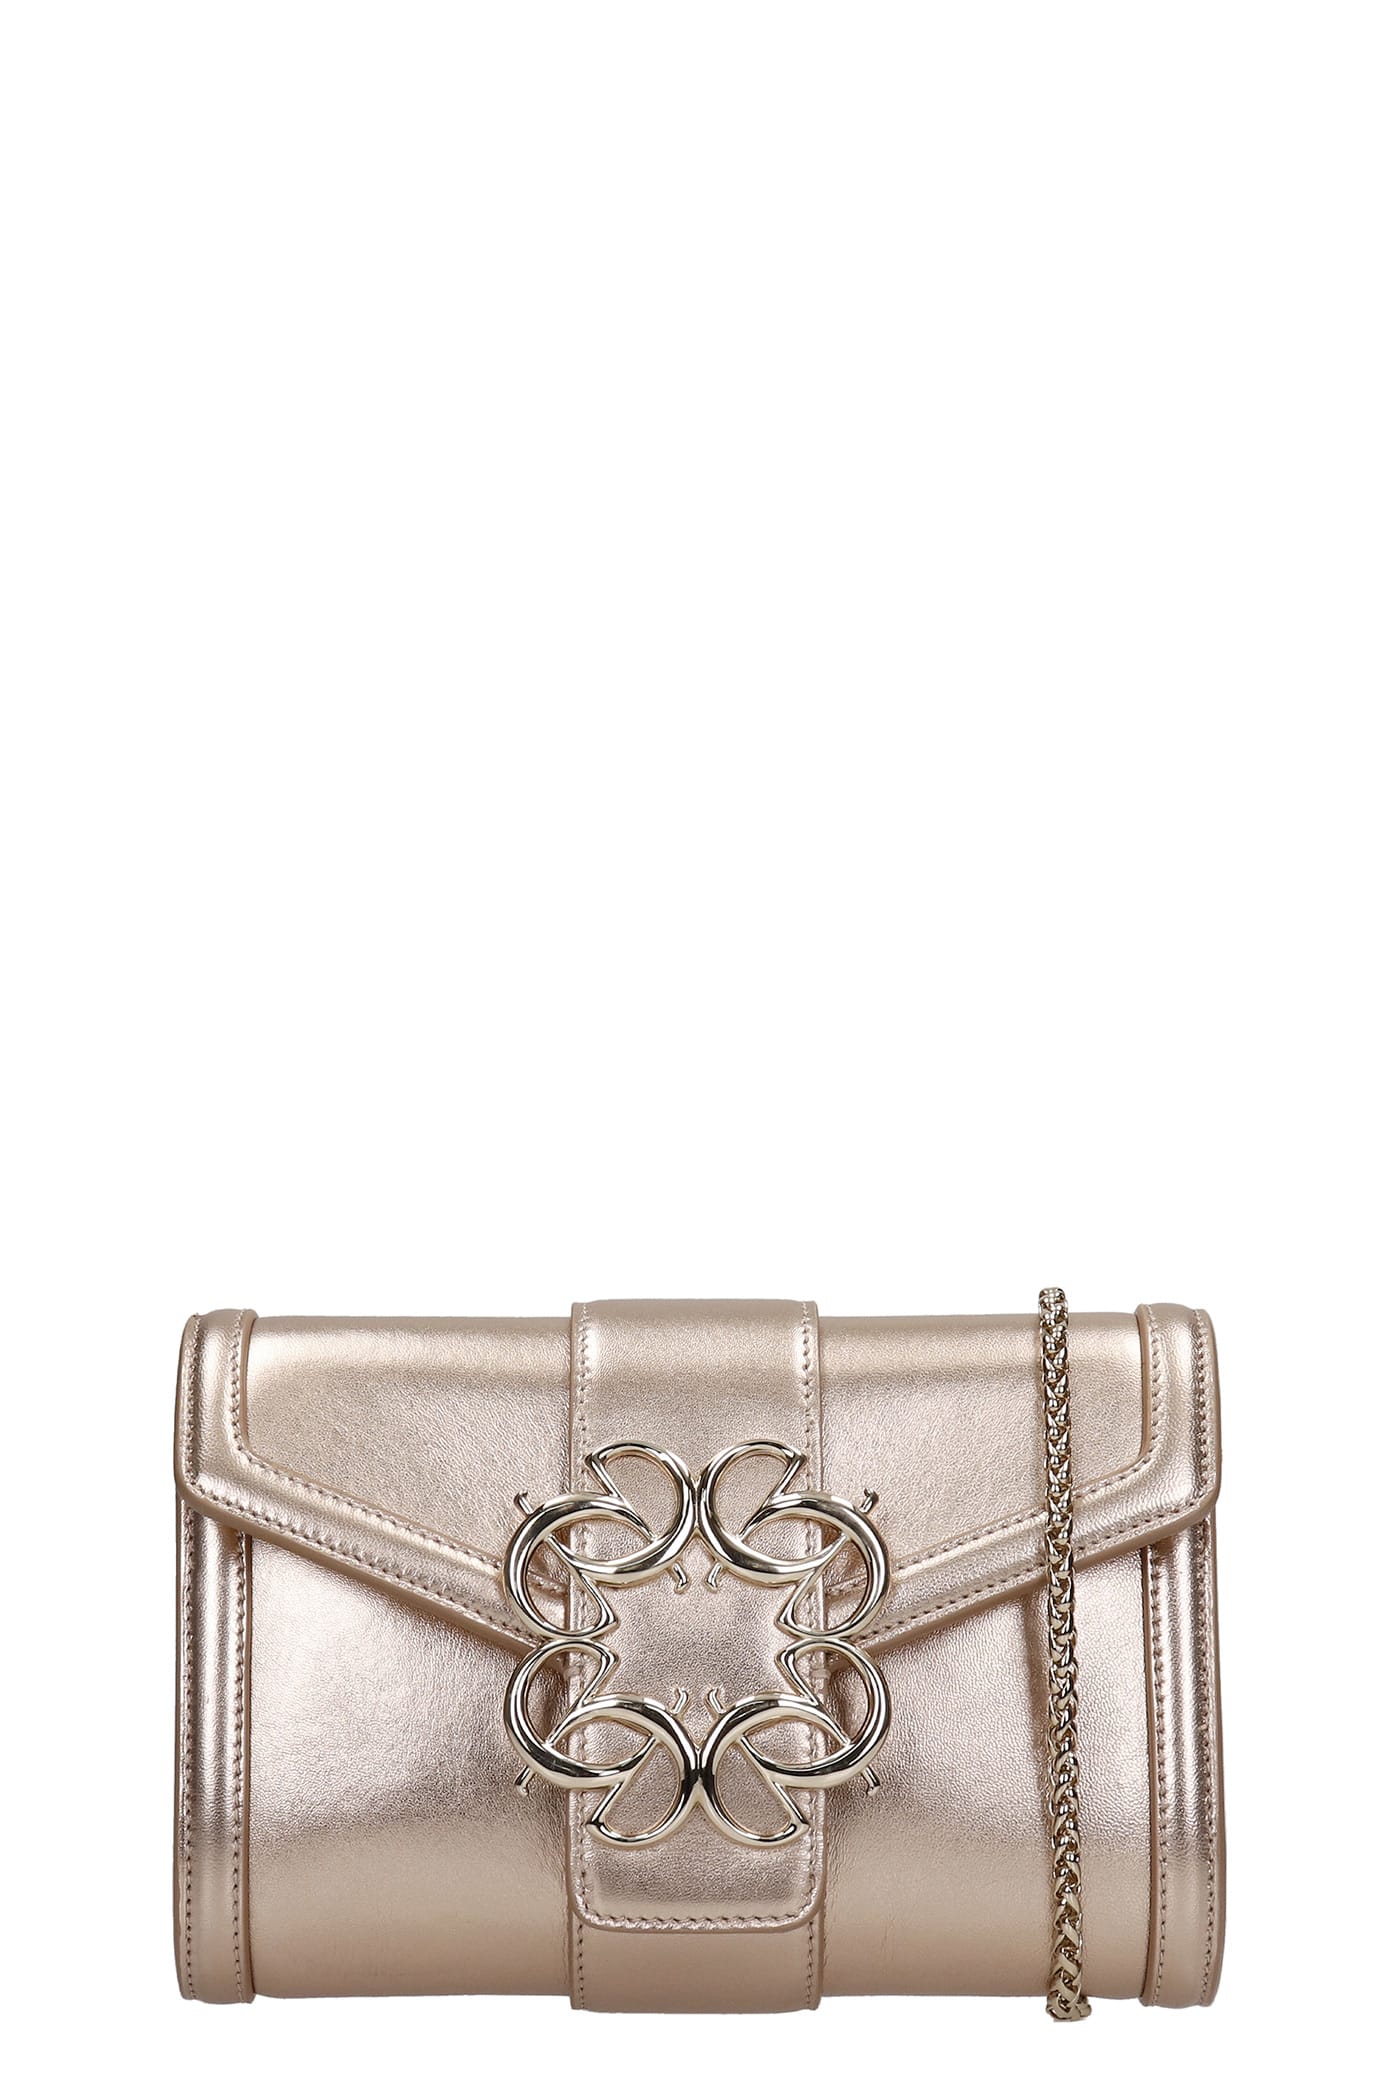 Elie Saab Clutch In Copper Leather